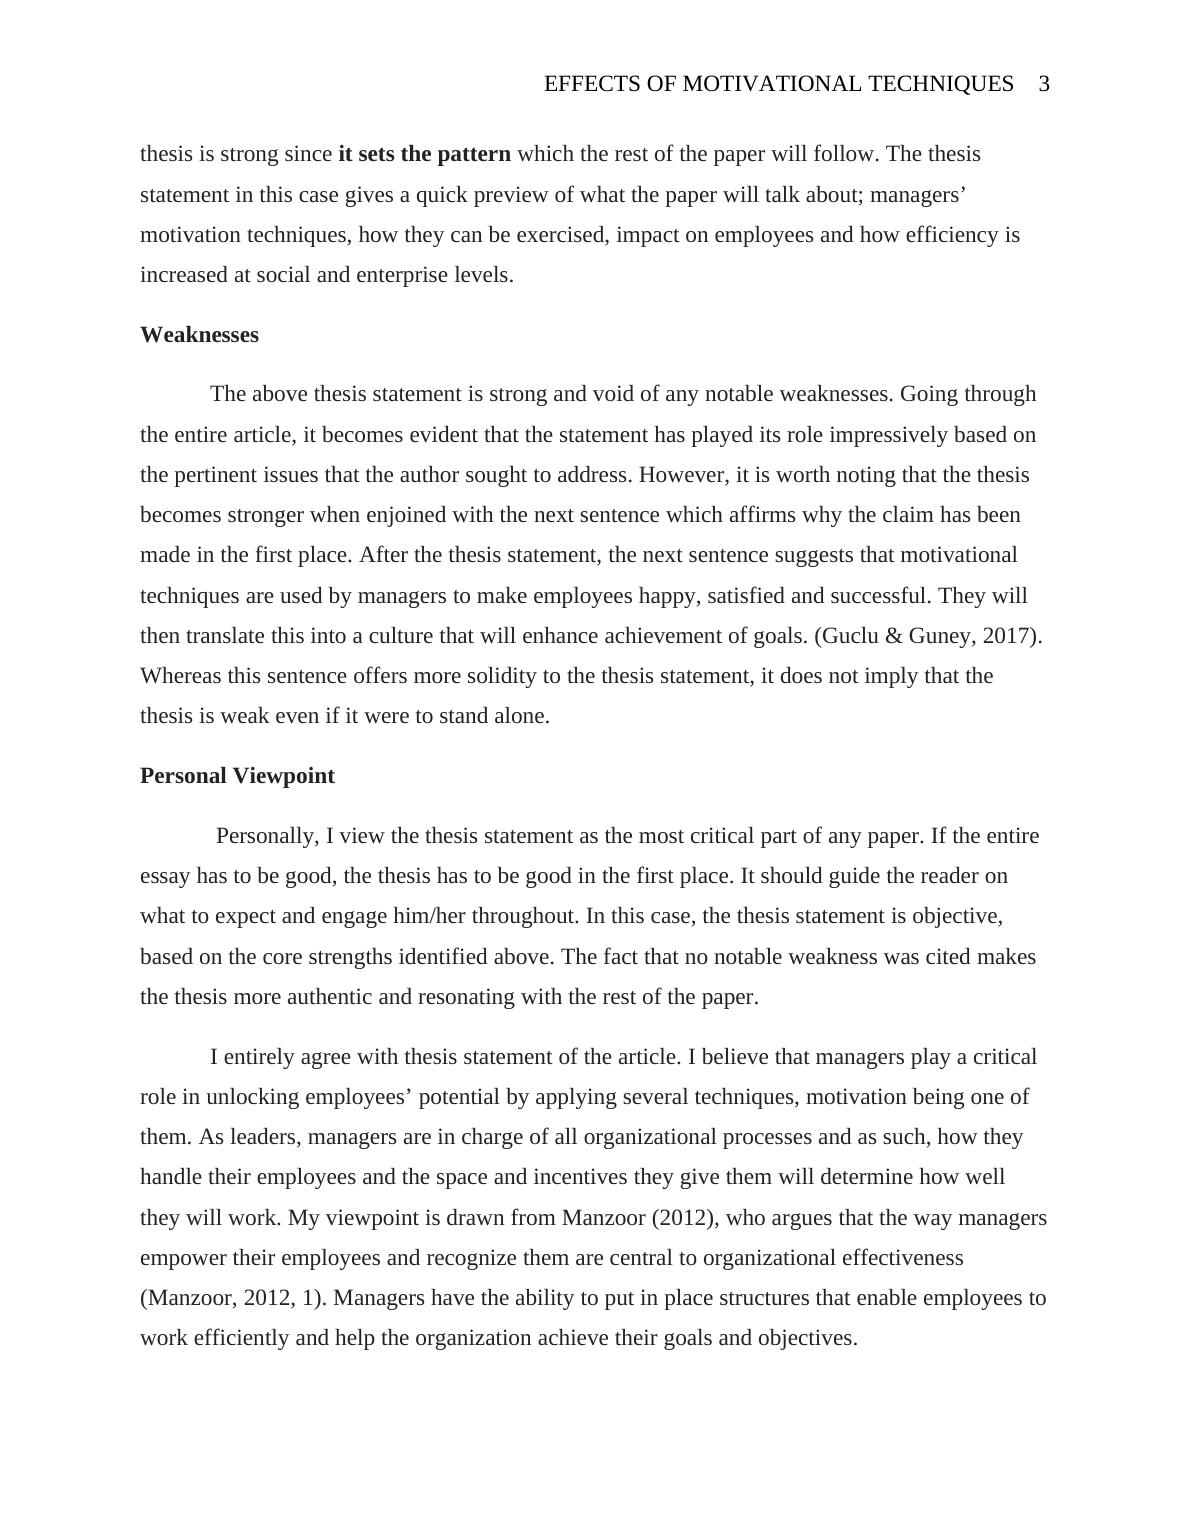 Essay on The Effect of the Motivation Techniques_3